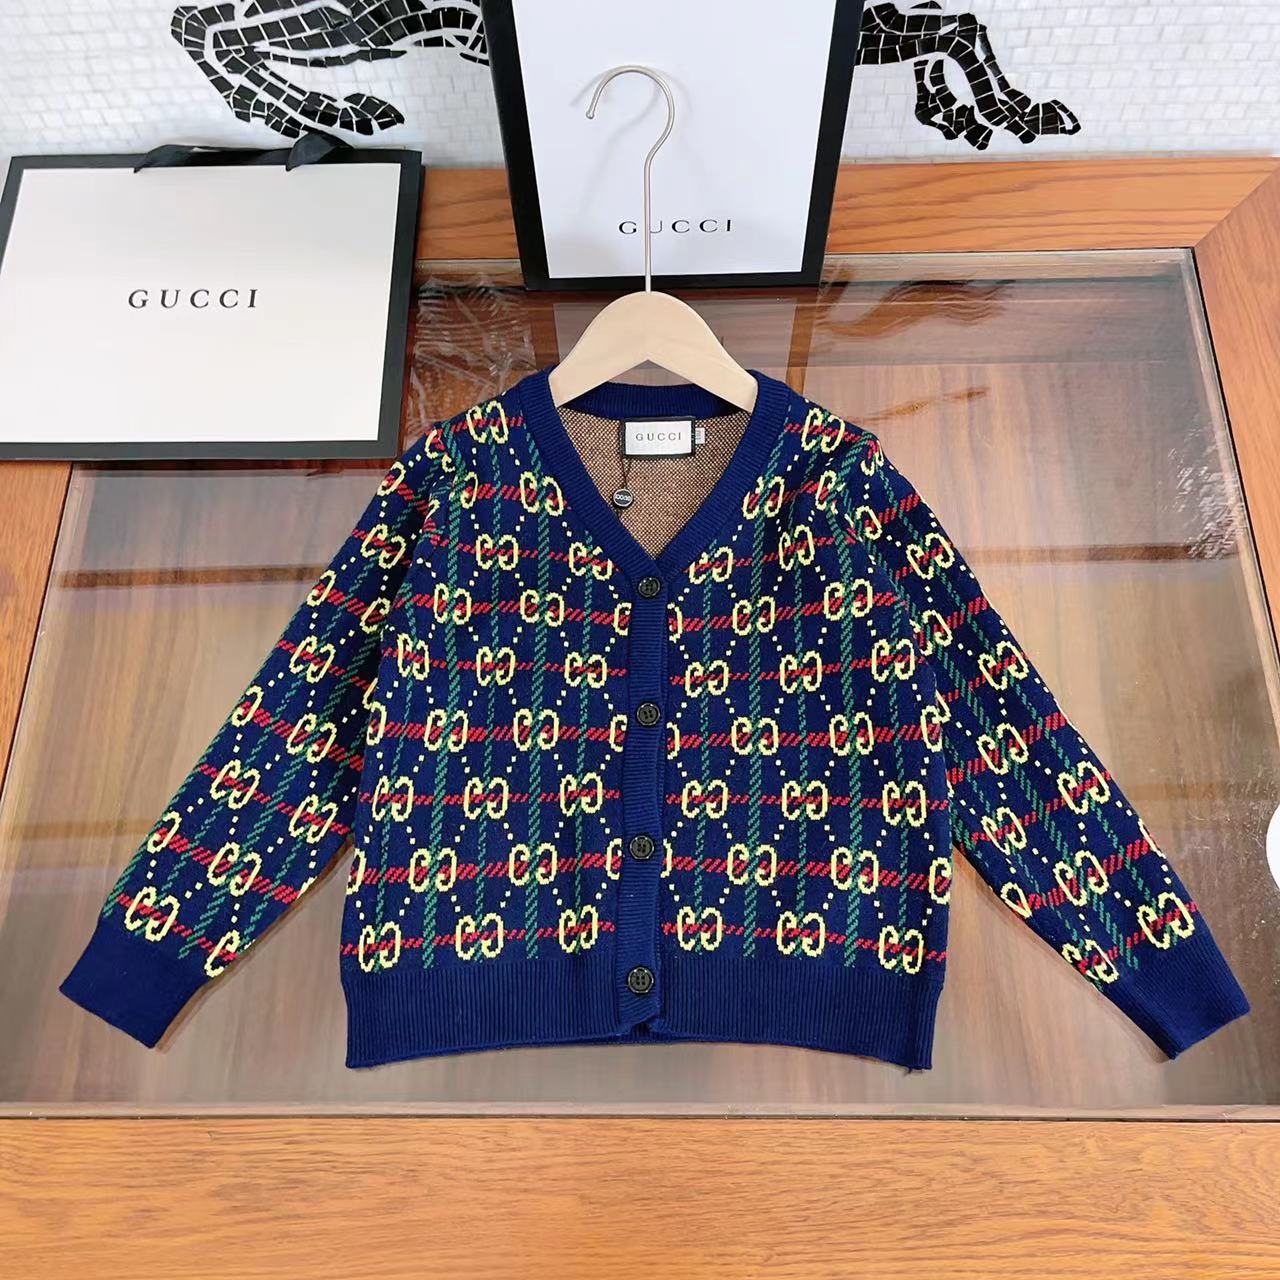 Gucci Clothing Cardigans Knit Sweater Kids Unisex Knitting Fall Collection Fashion